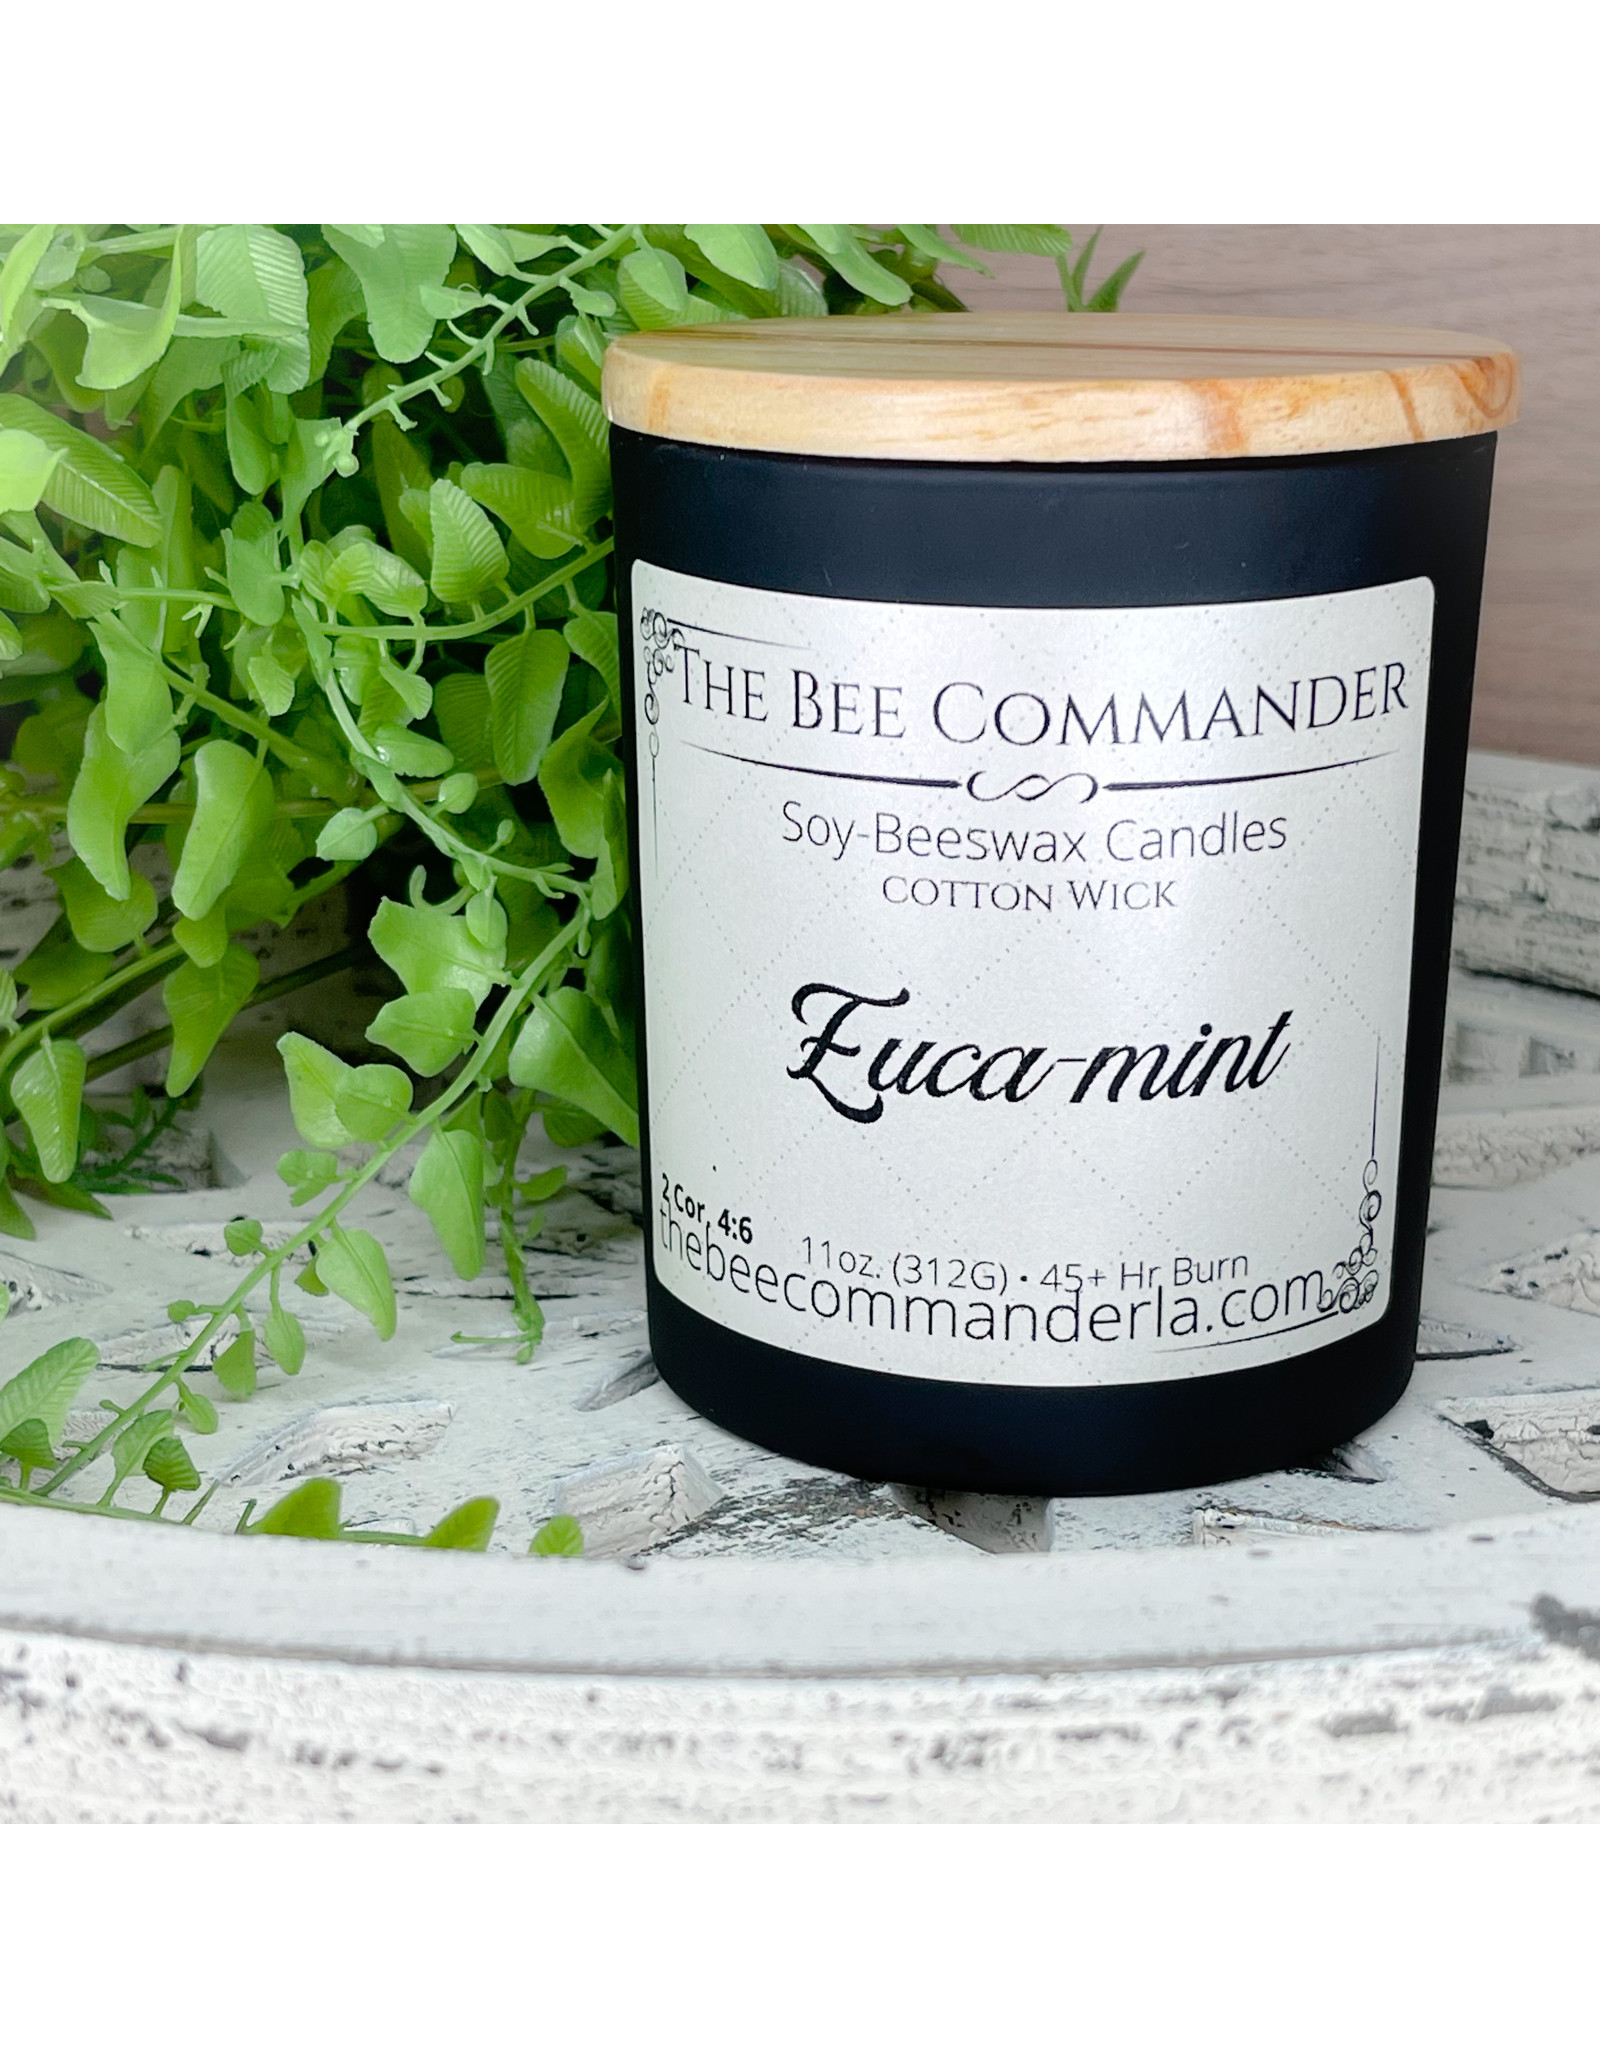 The Bee Commander Euca - Mint Bee/Soy Candle 11oz